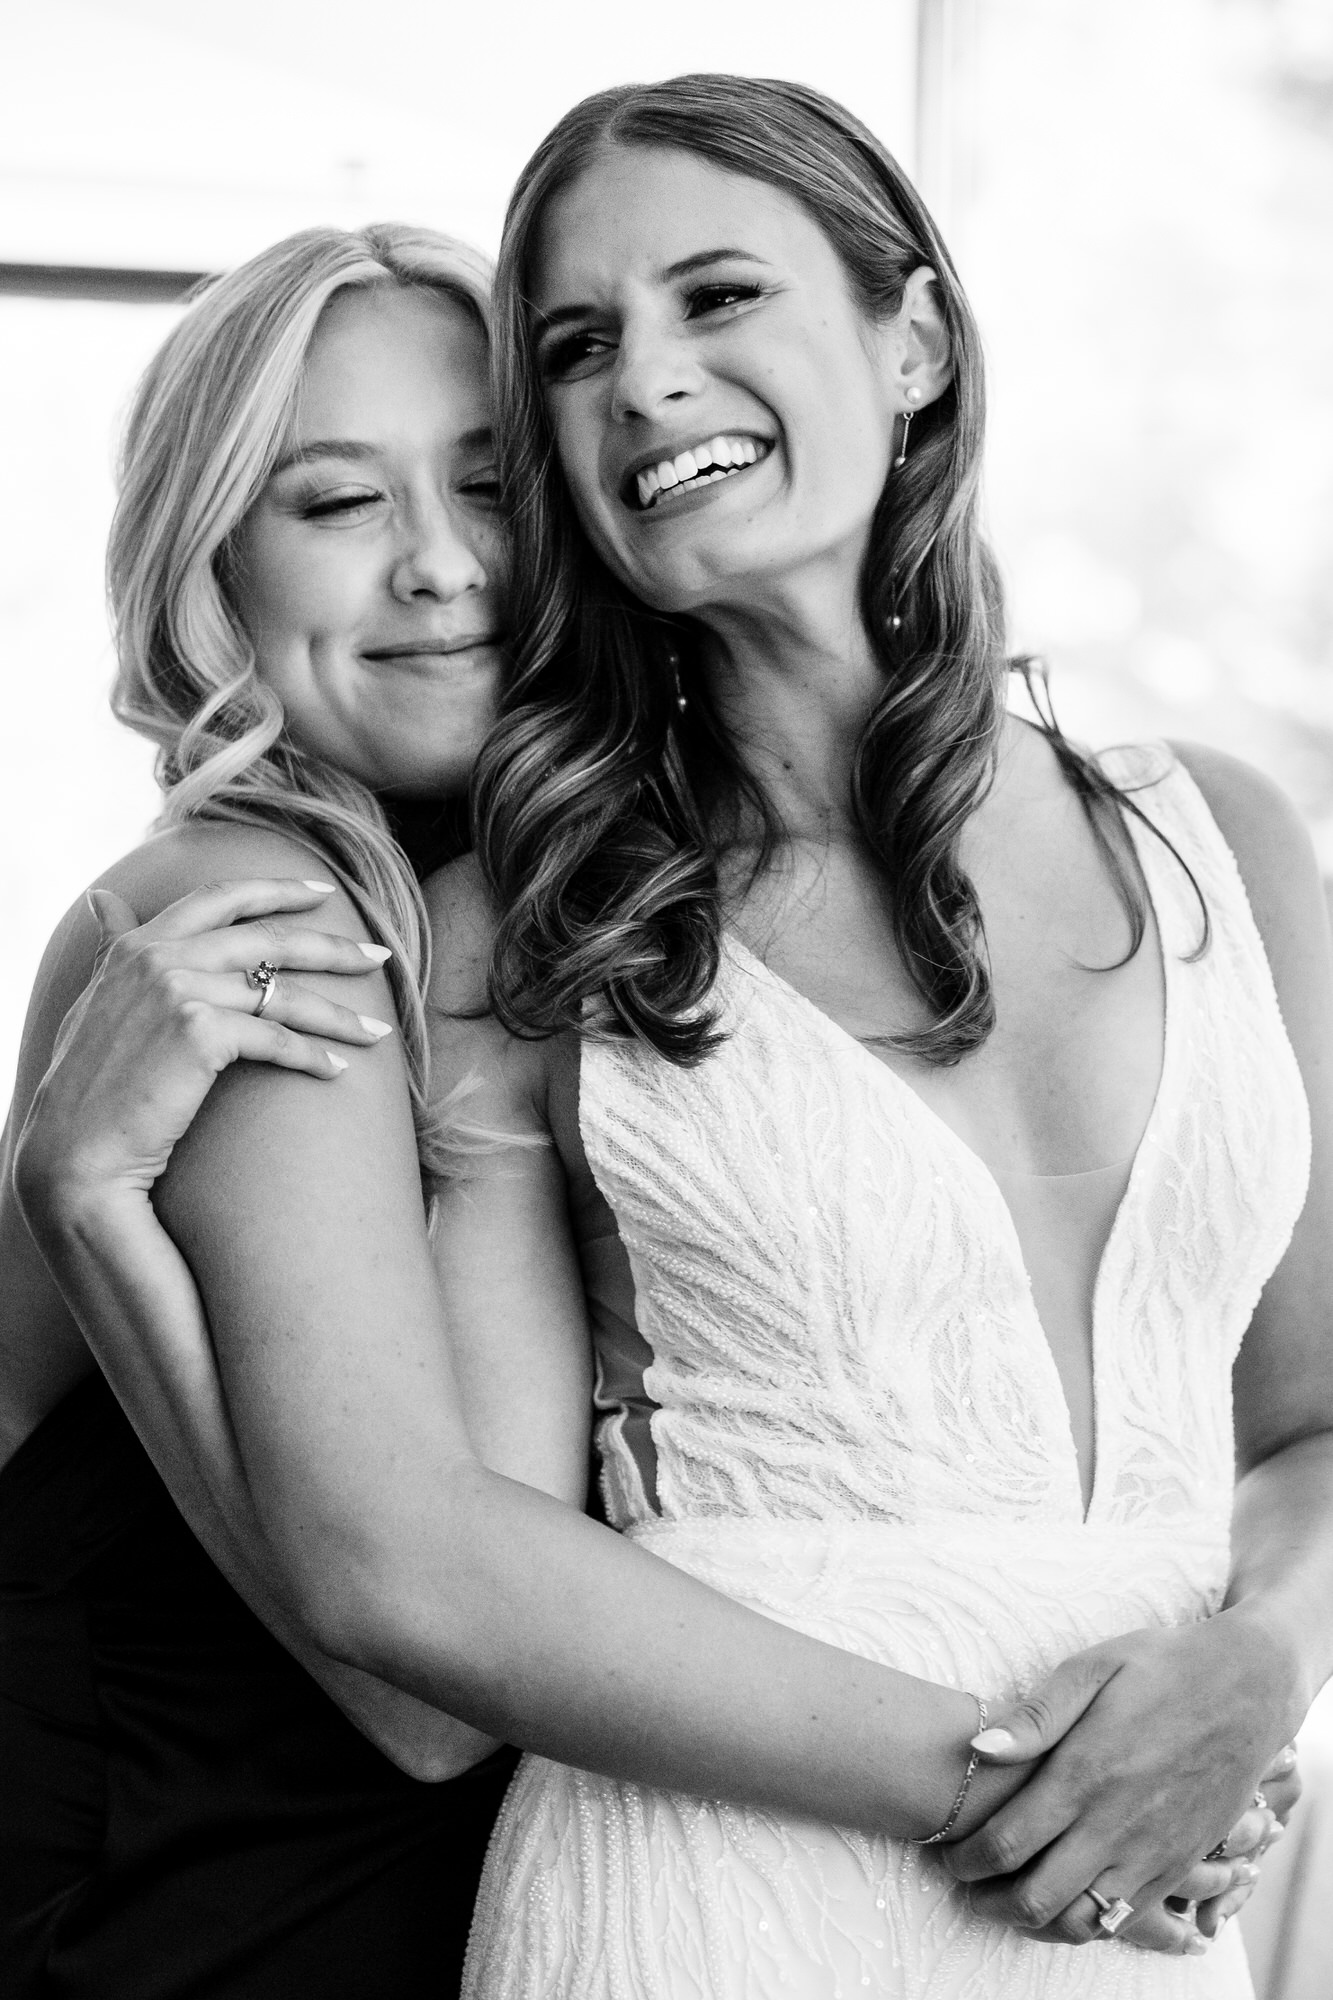 Bride and her bridesmaid share a special moment together before the wedding.